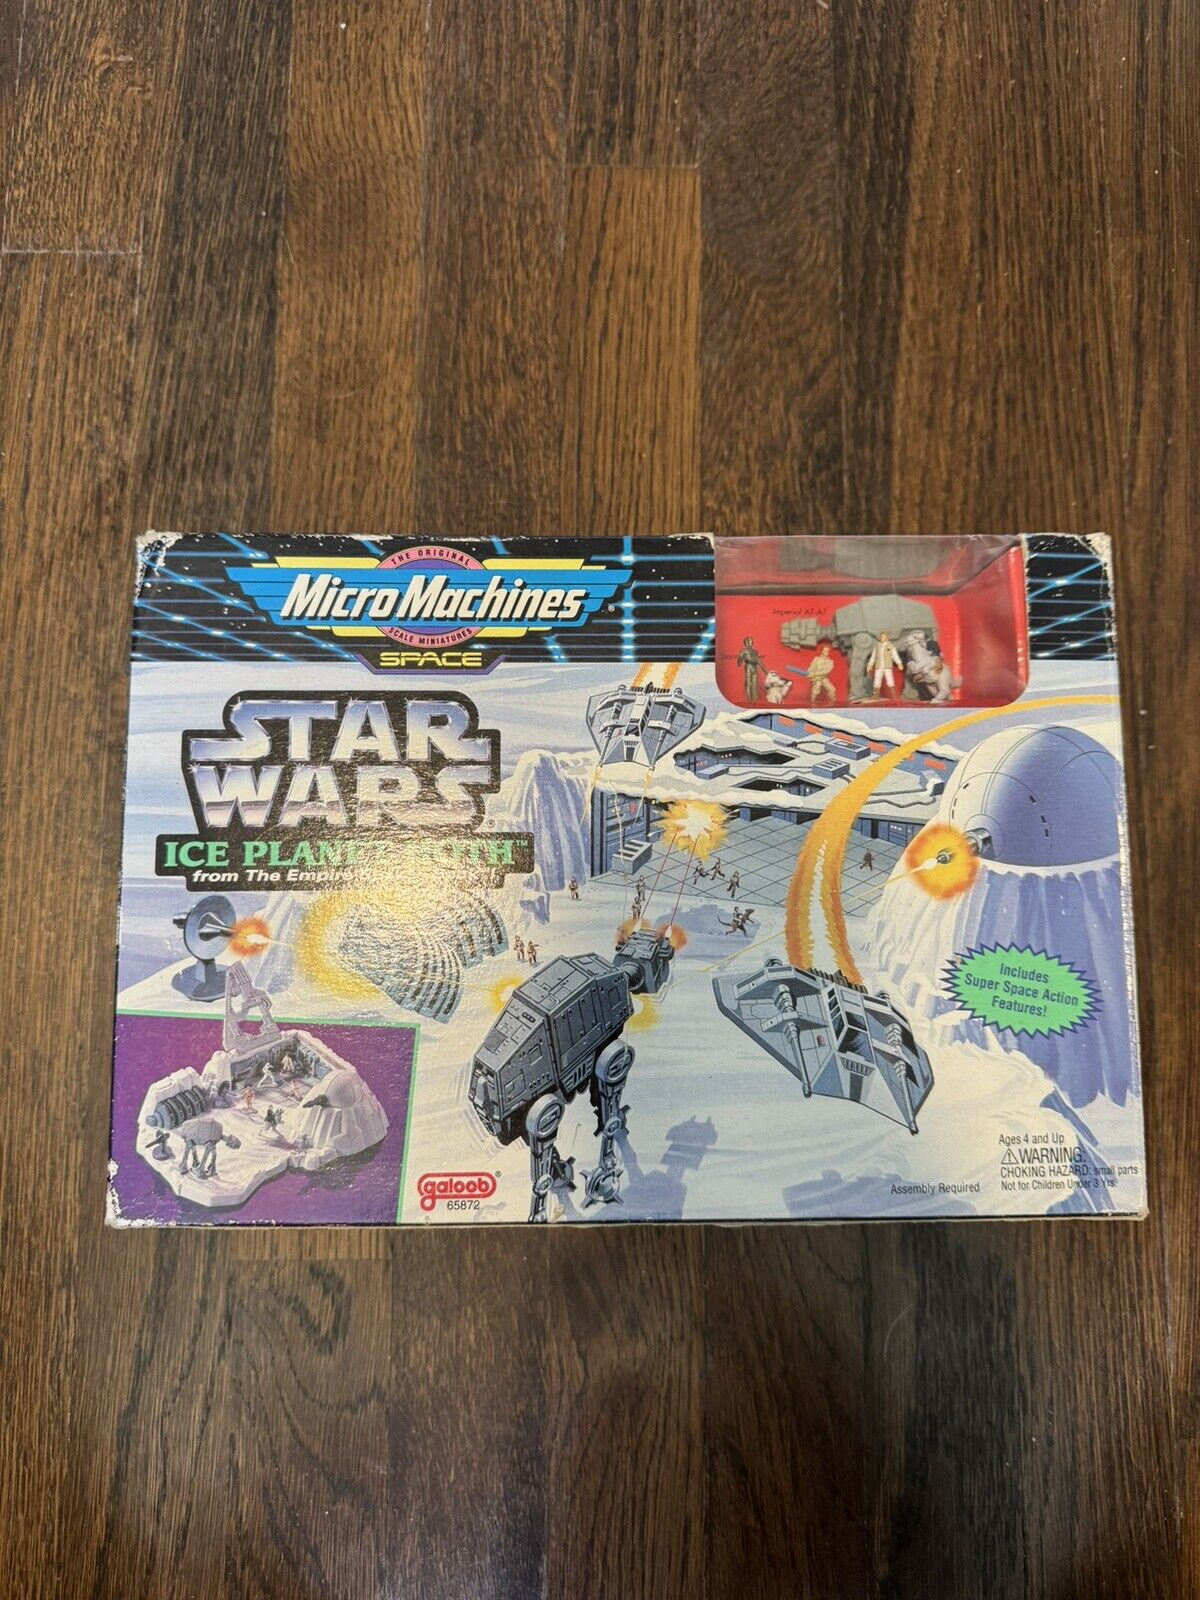 Vintage Star Wars Micro Machines Ice Planet Hoth Playset 1994 Galoob - Complete